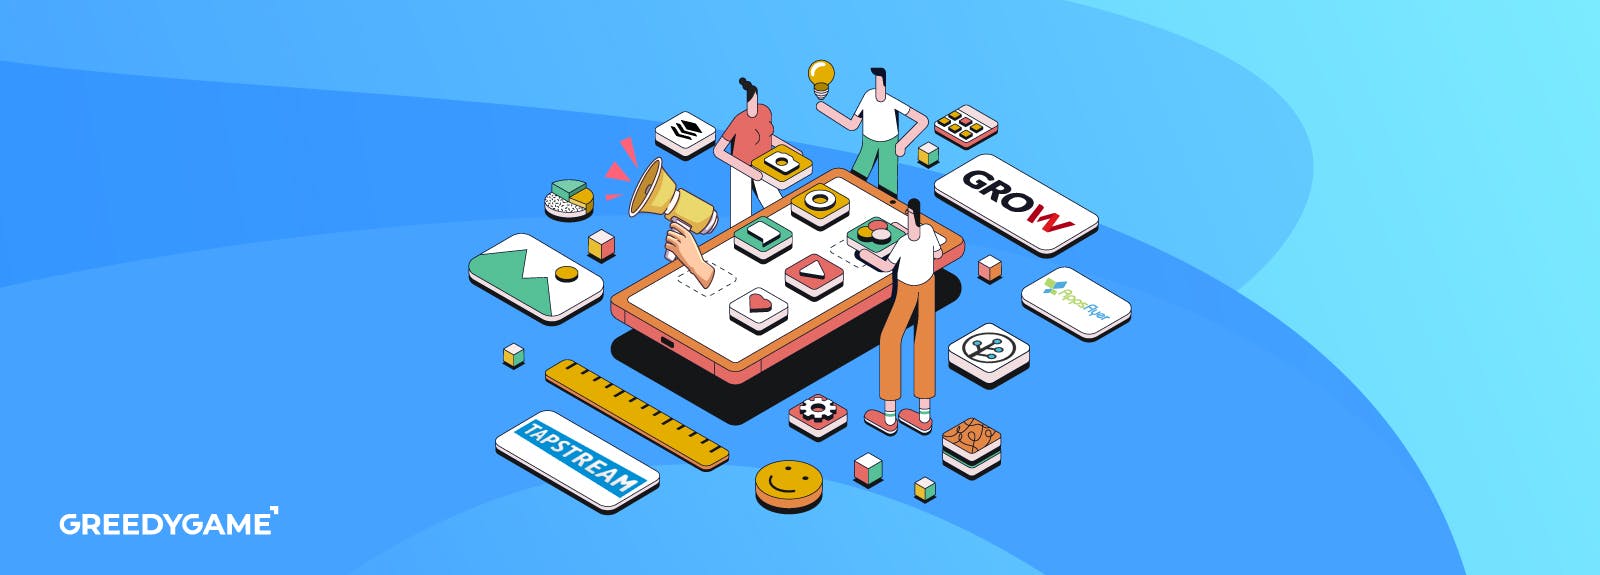 Illustration of app marketing tools to increase app visibility and acquire more users